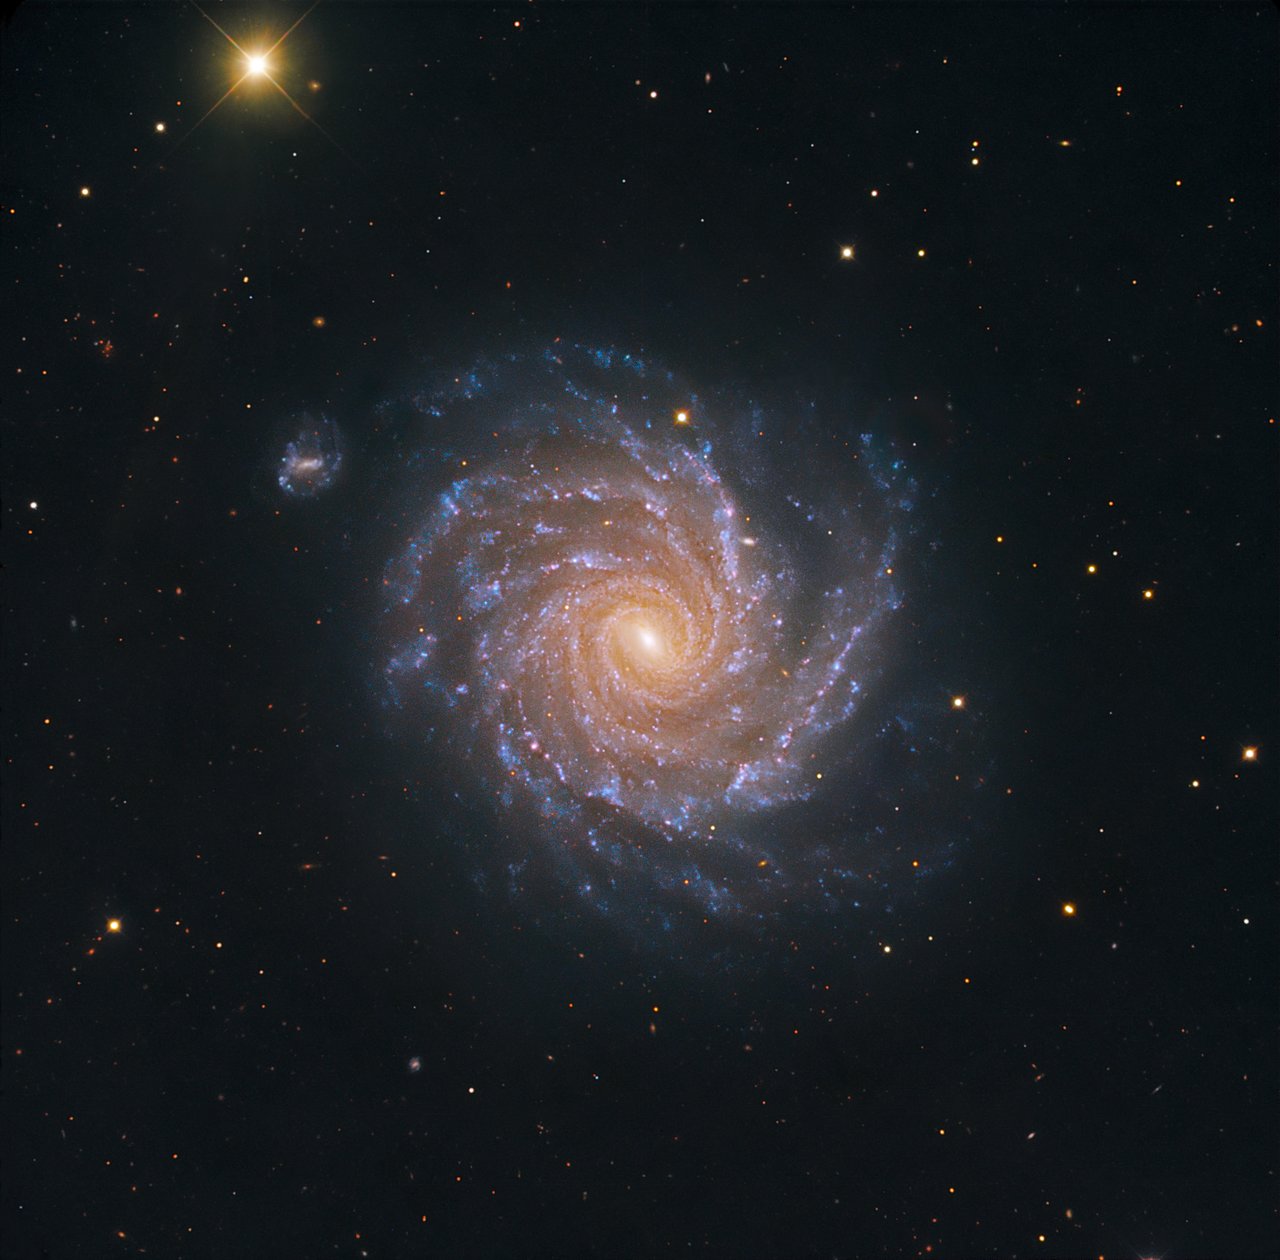 The striking, large spiral galaxy NGC 1232, and its distorted companion shaped like the greek letter "theta". The pair is located roughly 60 million light-years away in the constellation Eridanus (The River). Billions of stars and dark dust are caught up in this beautiful gravitational swirl. The blue spiral arms with their many young stars and star-forming regions make a striking contrast with the yellow-reddish core of older stars. This image is based on data acquired with the 1.5 m Danish telescope at the ESO La Silla Observatory in Chile, through three filters (B: 900 s, V: 400 s, R: 400 s).